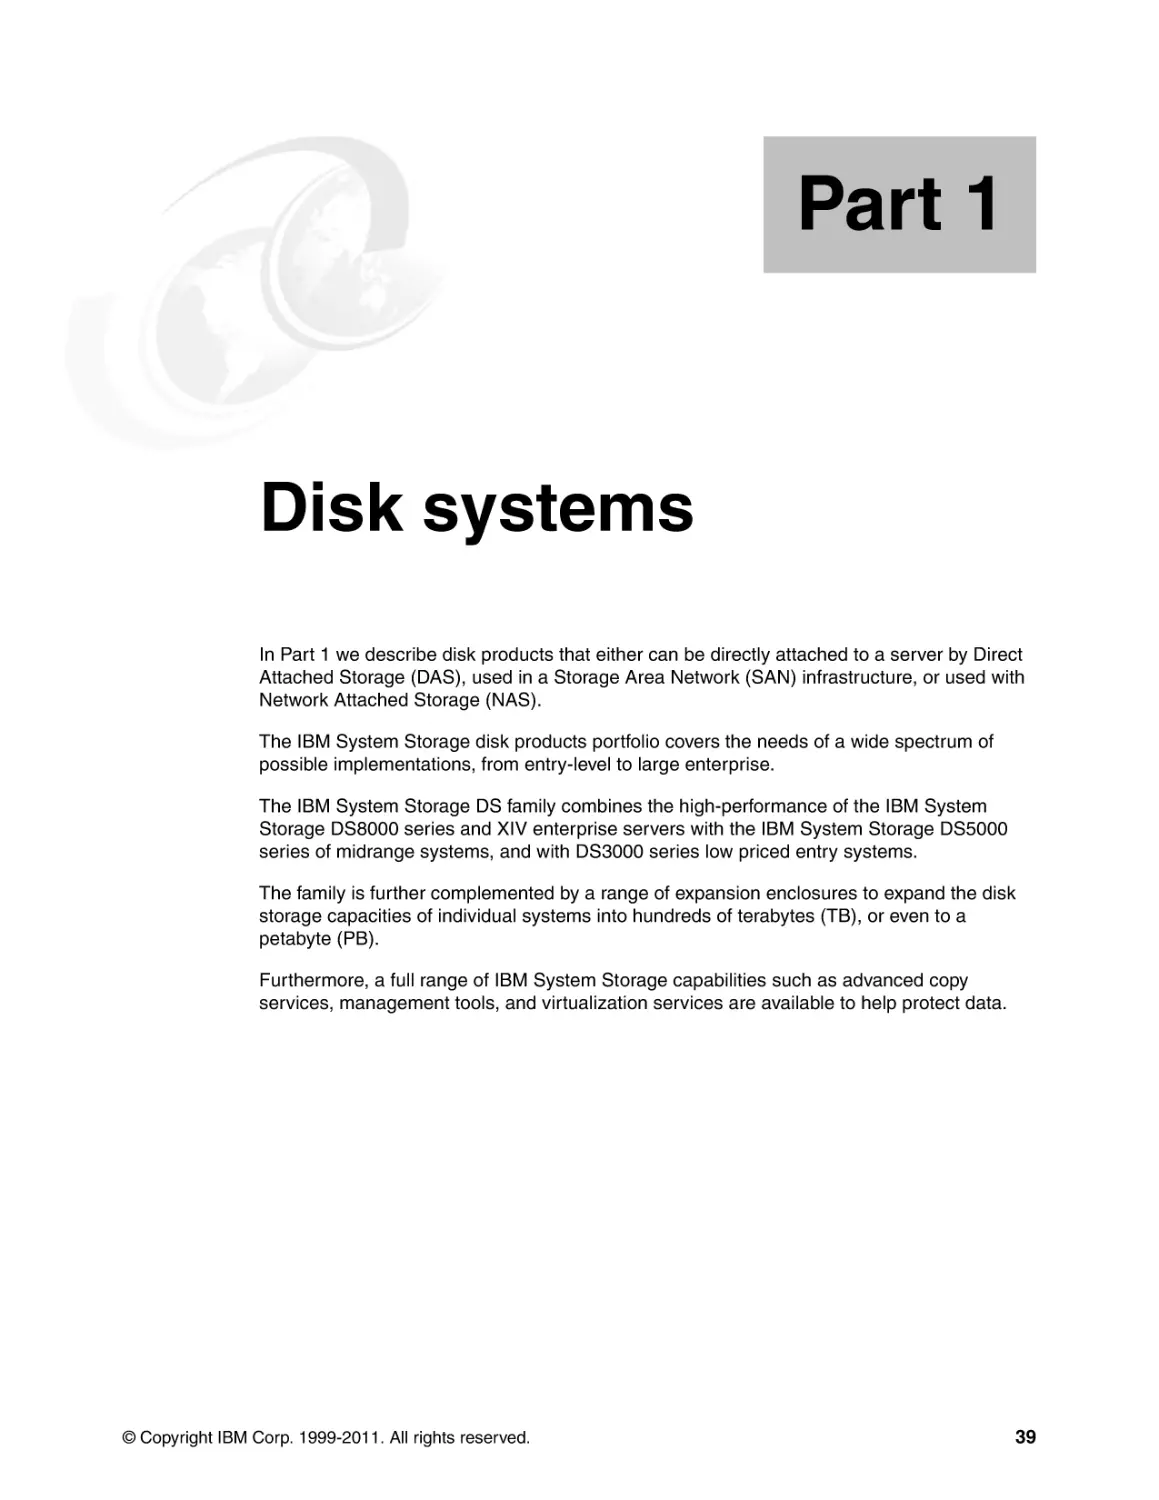 Part 1 Disk systems